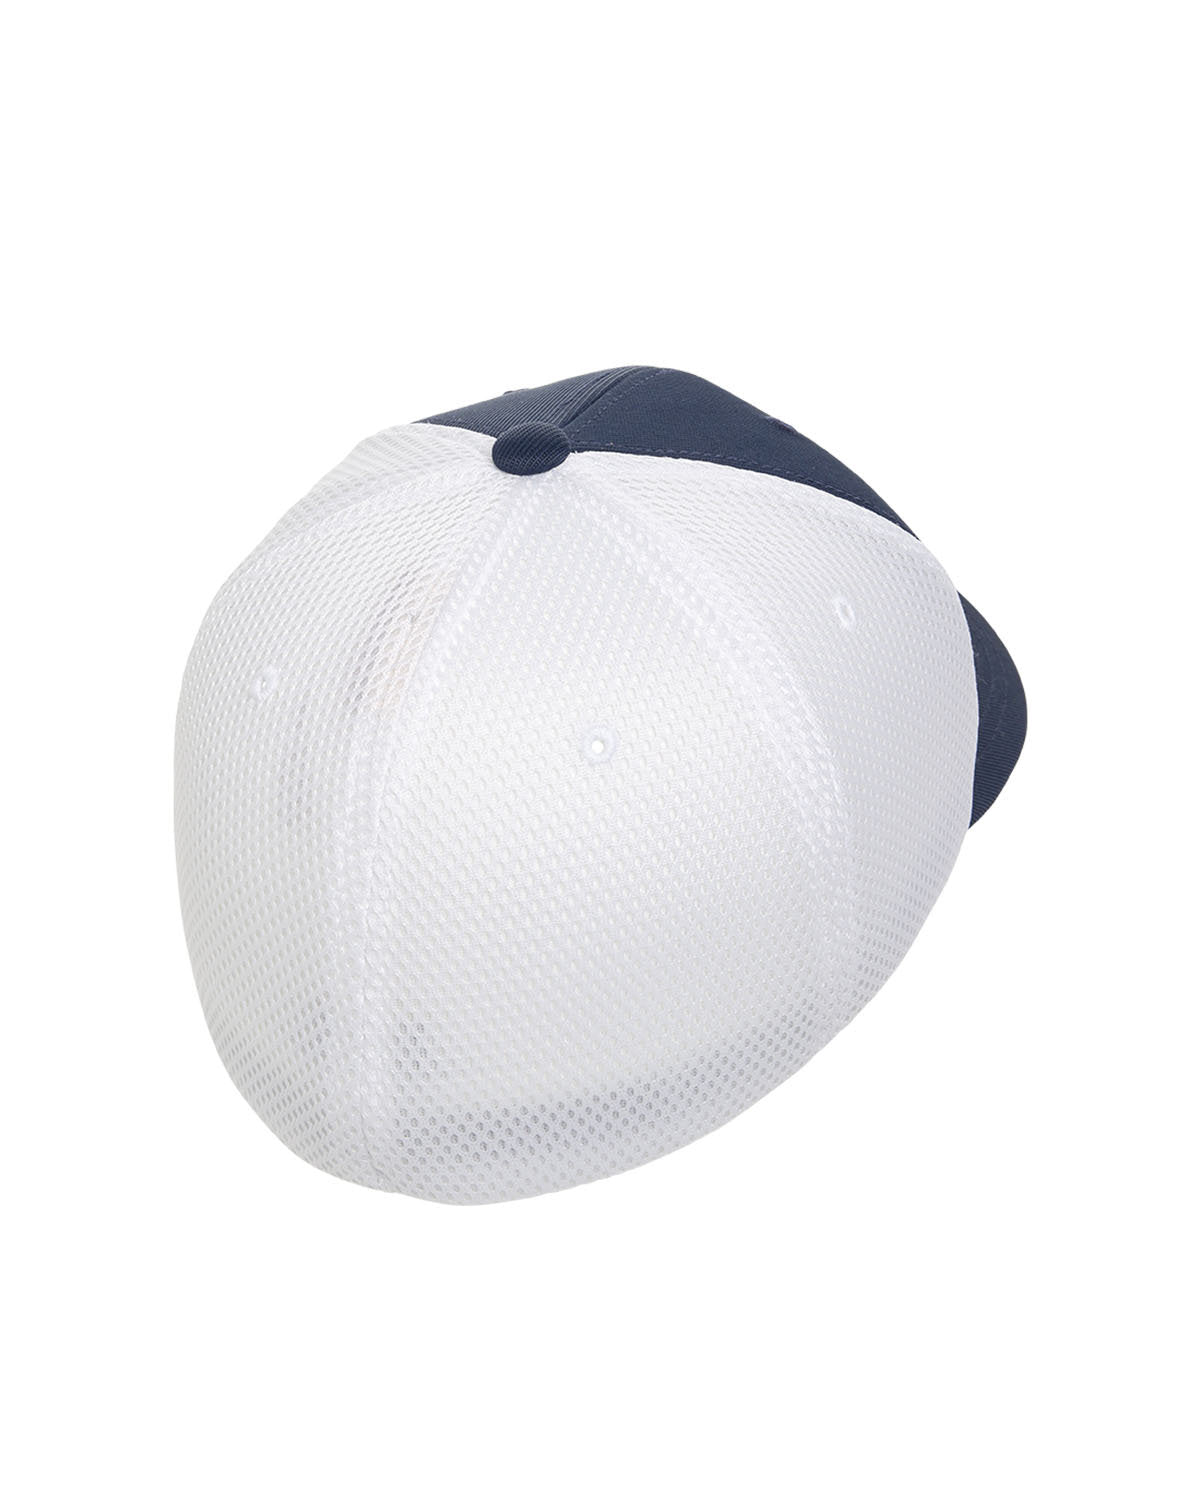 Flexfit Ultrafibre And Airmesh Customized Caps, Navy/ White